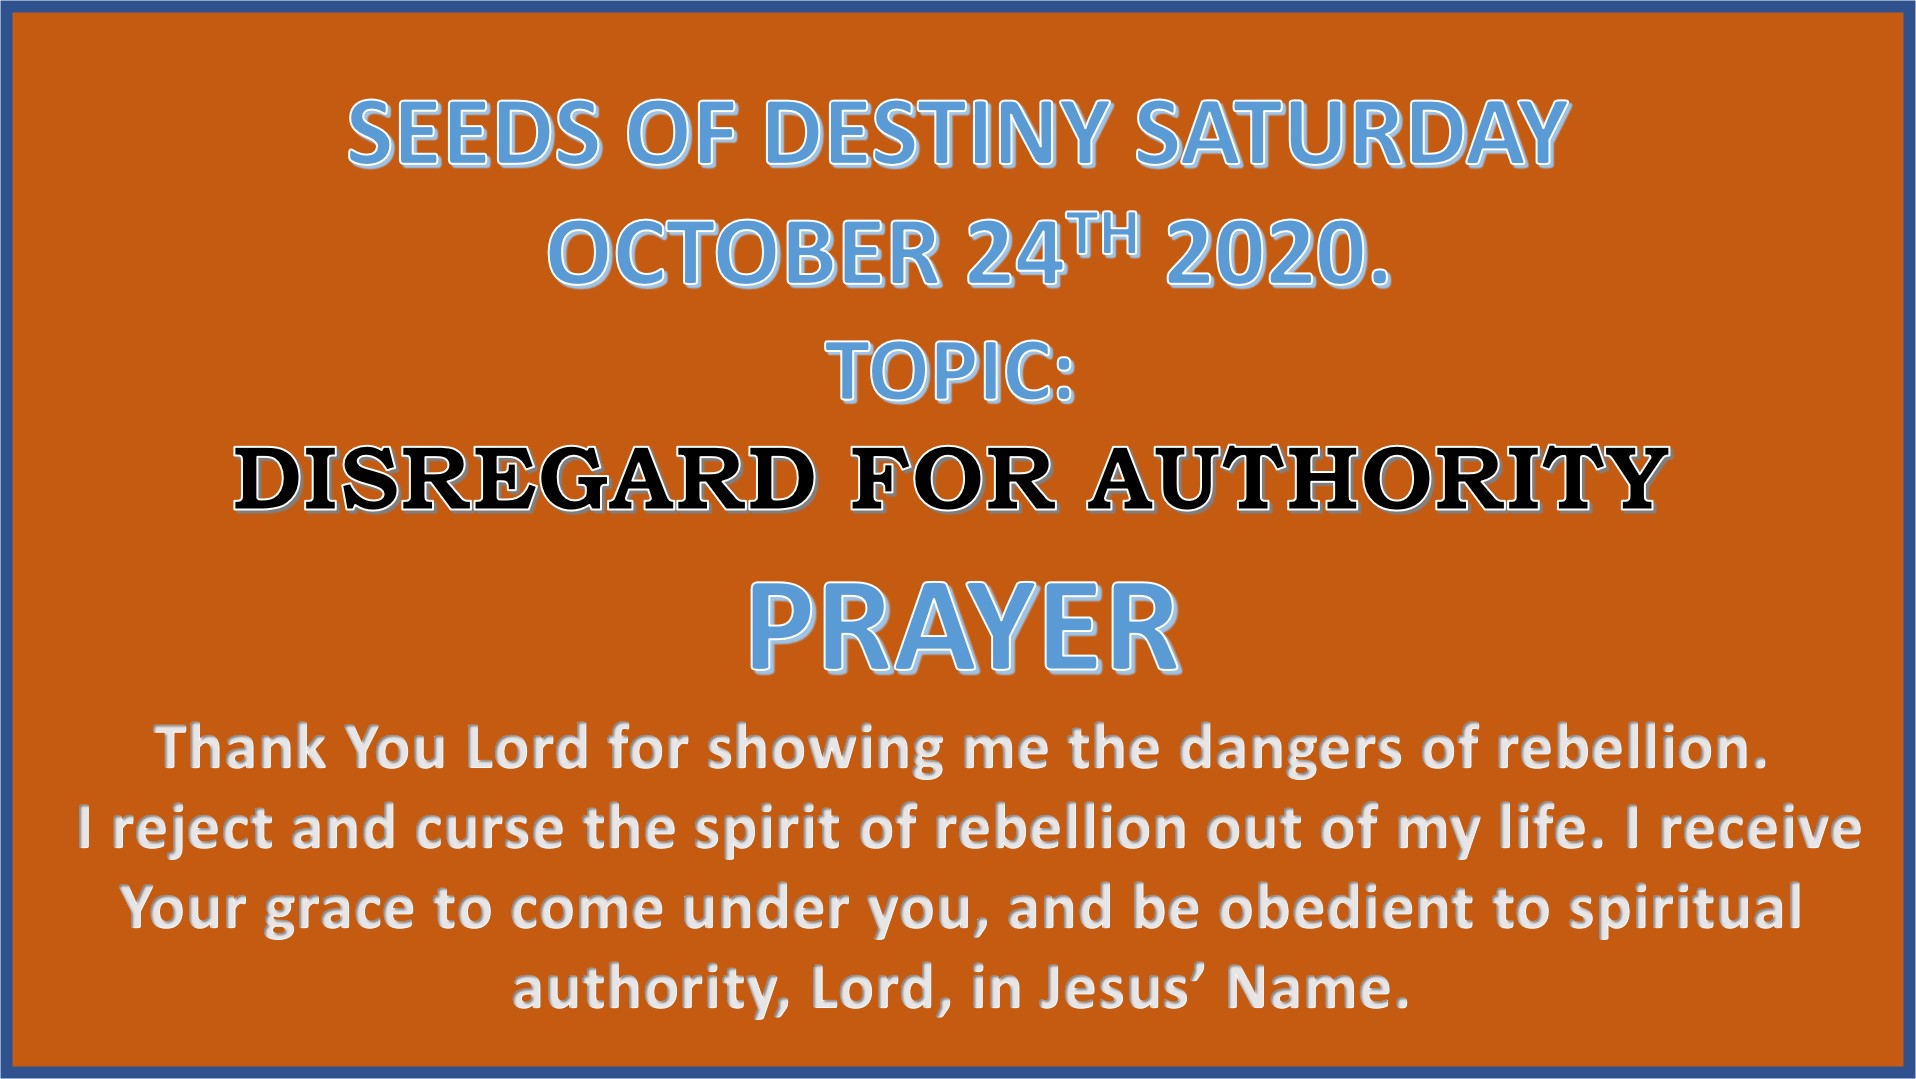 Seeds of Destiny Saturday 24th October 2020 by Dr Paul Enenche